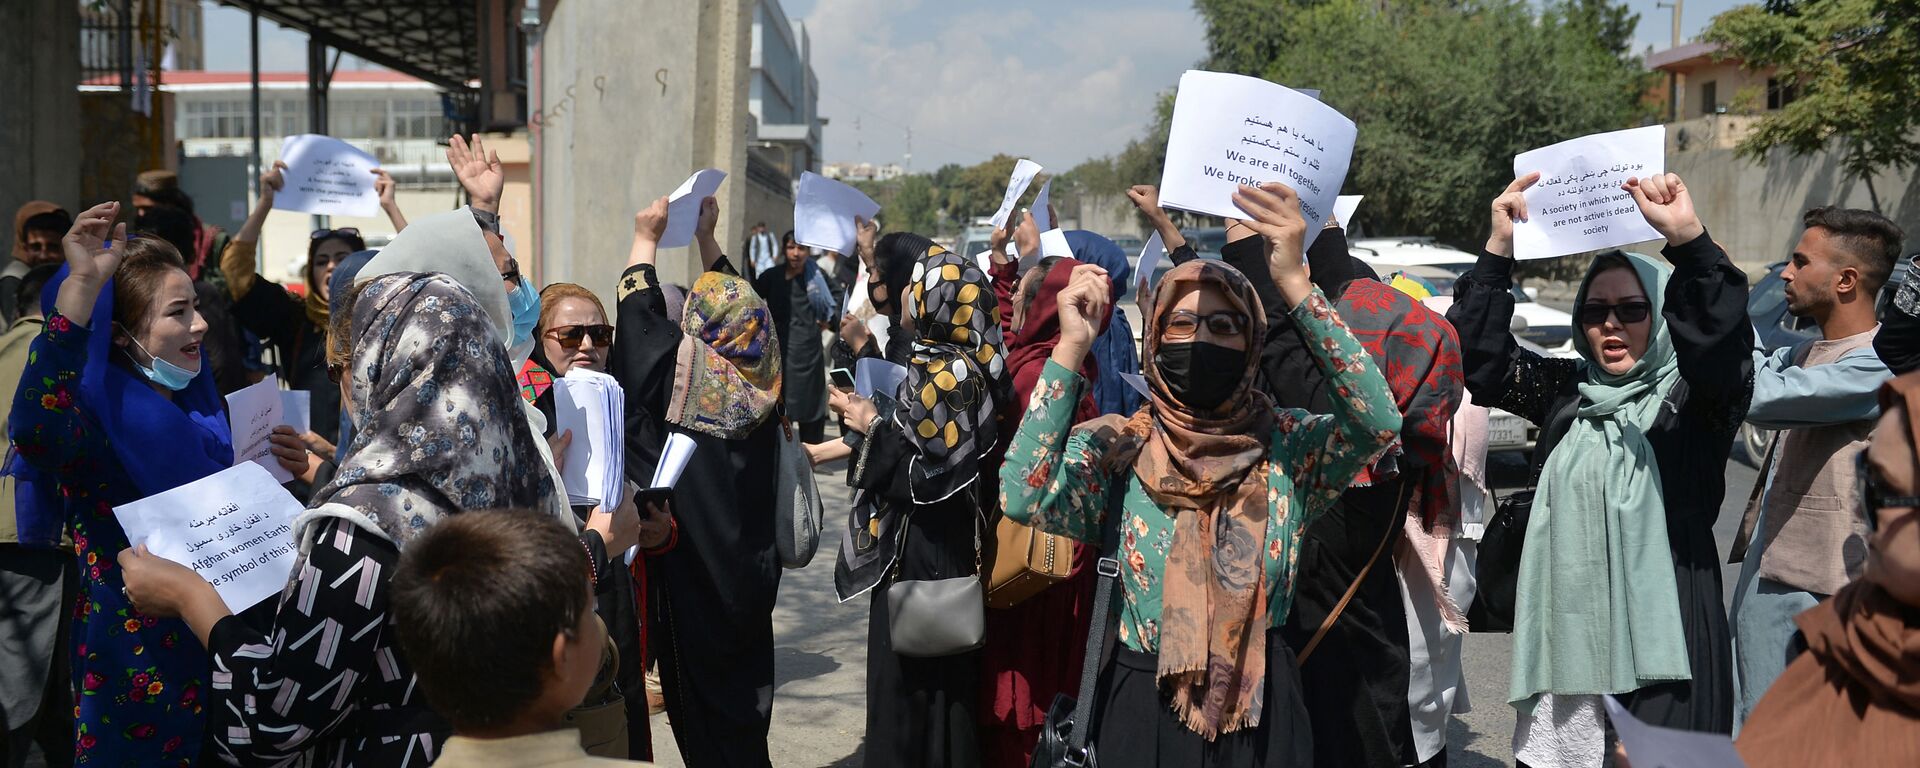 Afghan women take part in a protest march for their rights under the Taliban rule in the downtown area of Kabul on September 3, 2021.  - Sputnik International, 1920, 04.09.2021